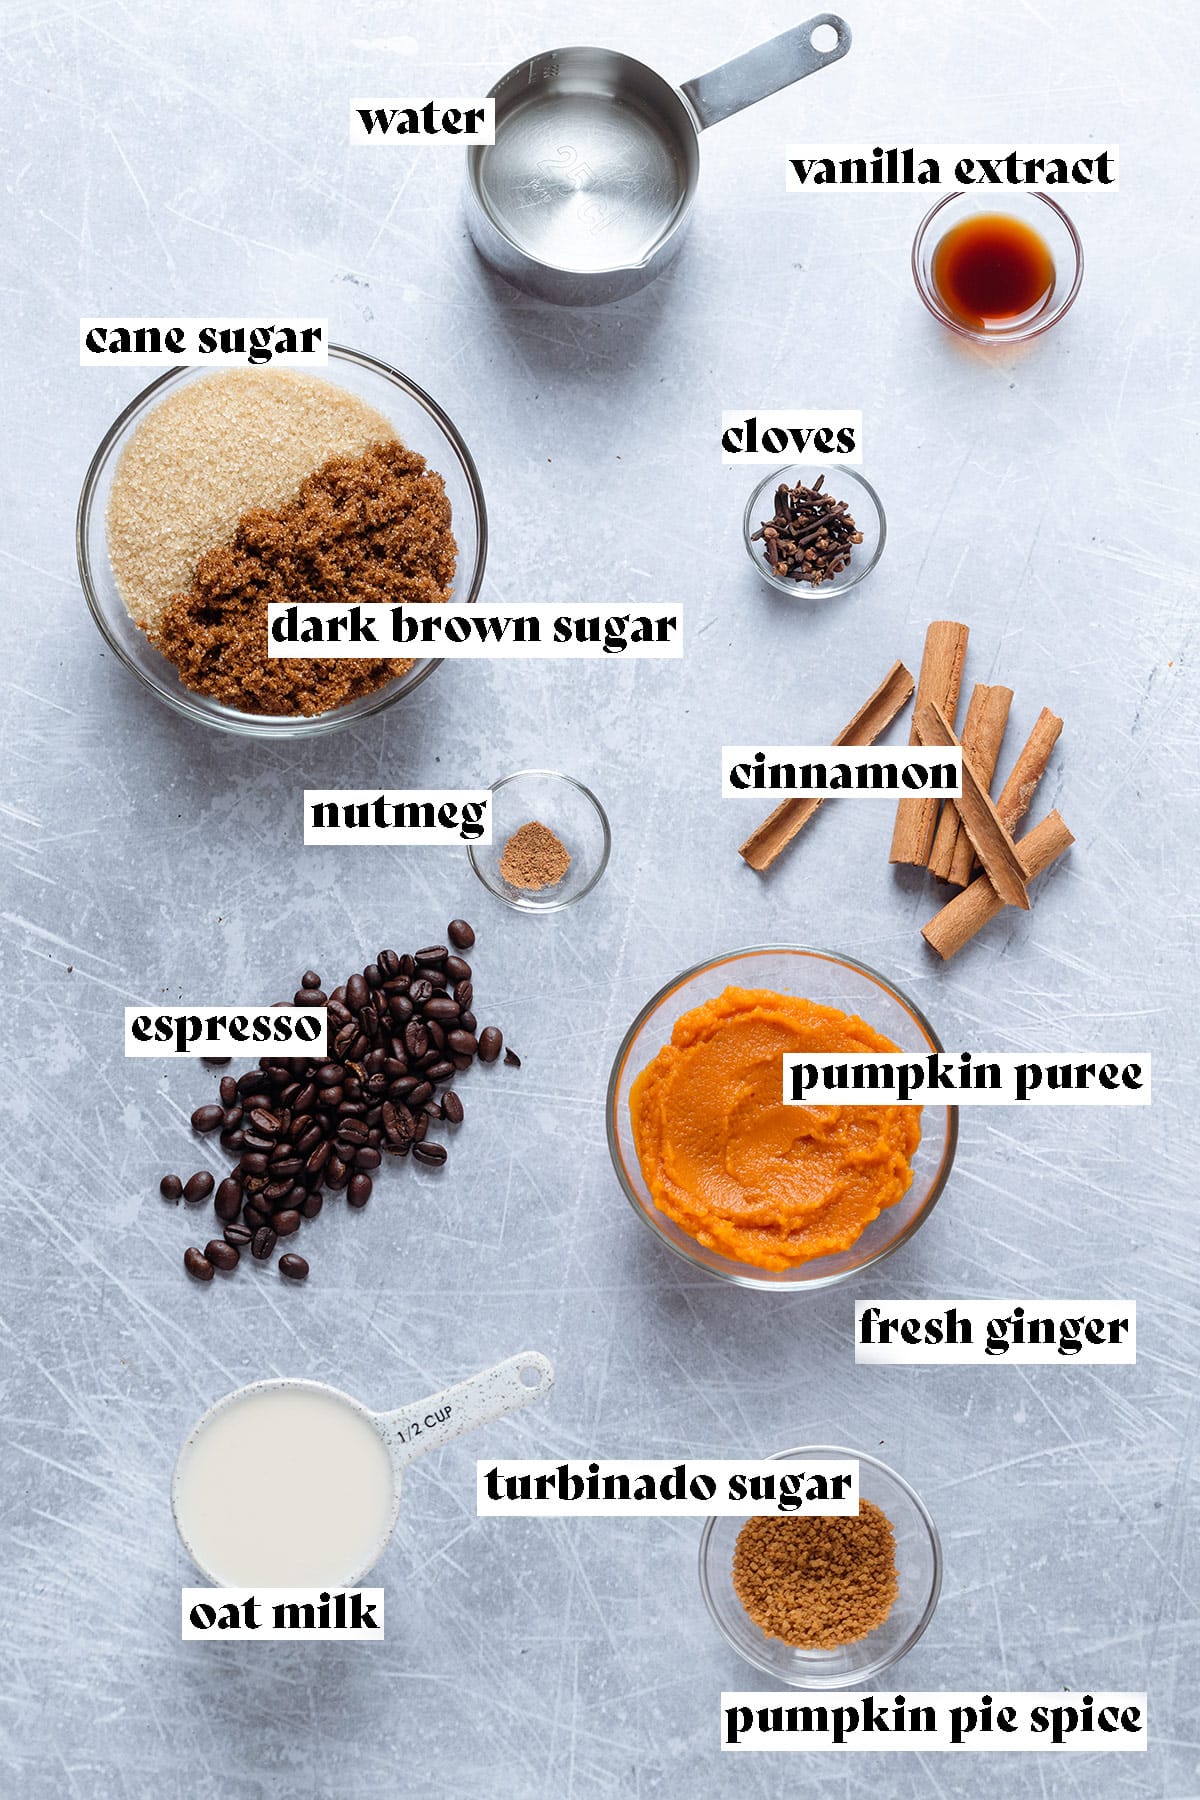 Pumpkin puree, sugar, cinnamon sticks, and other ingredients laid out on a grey background.